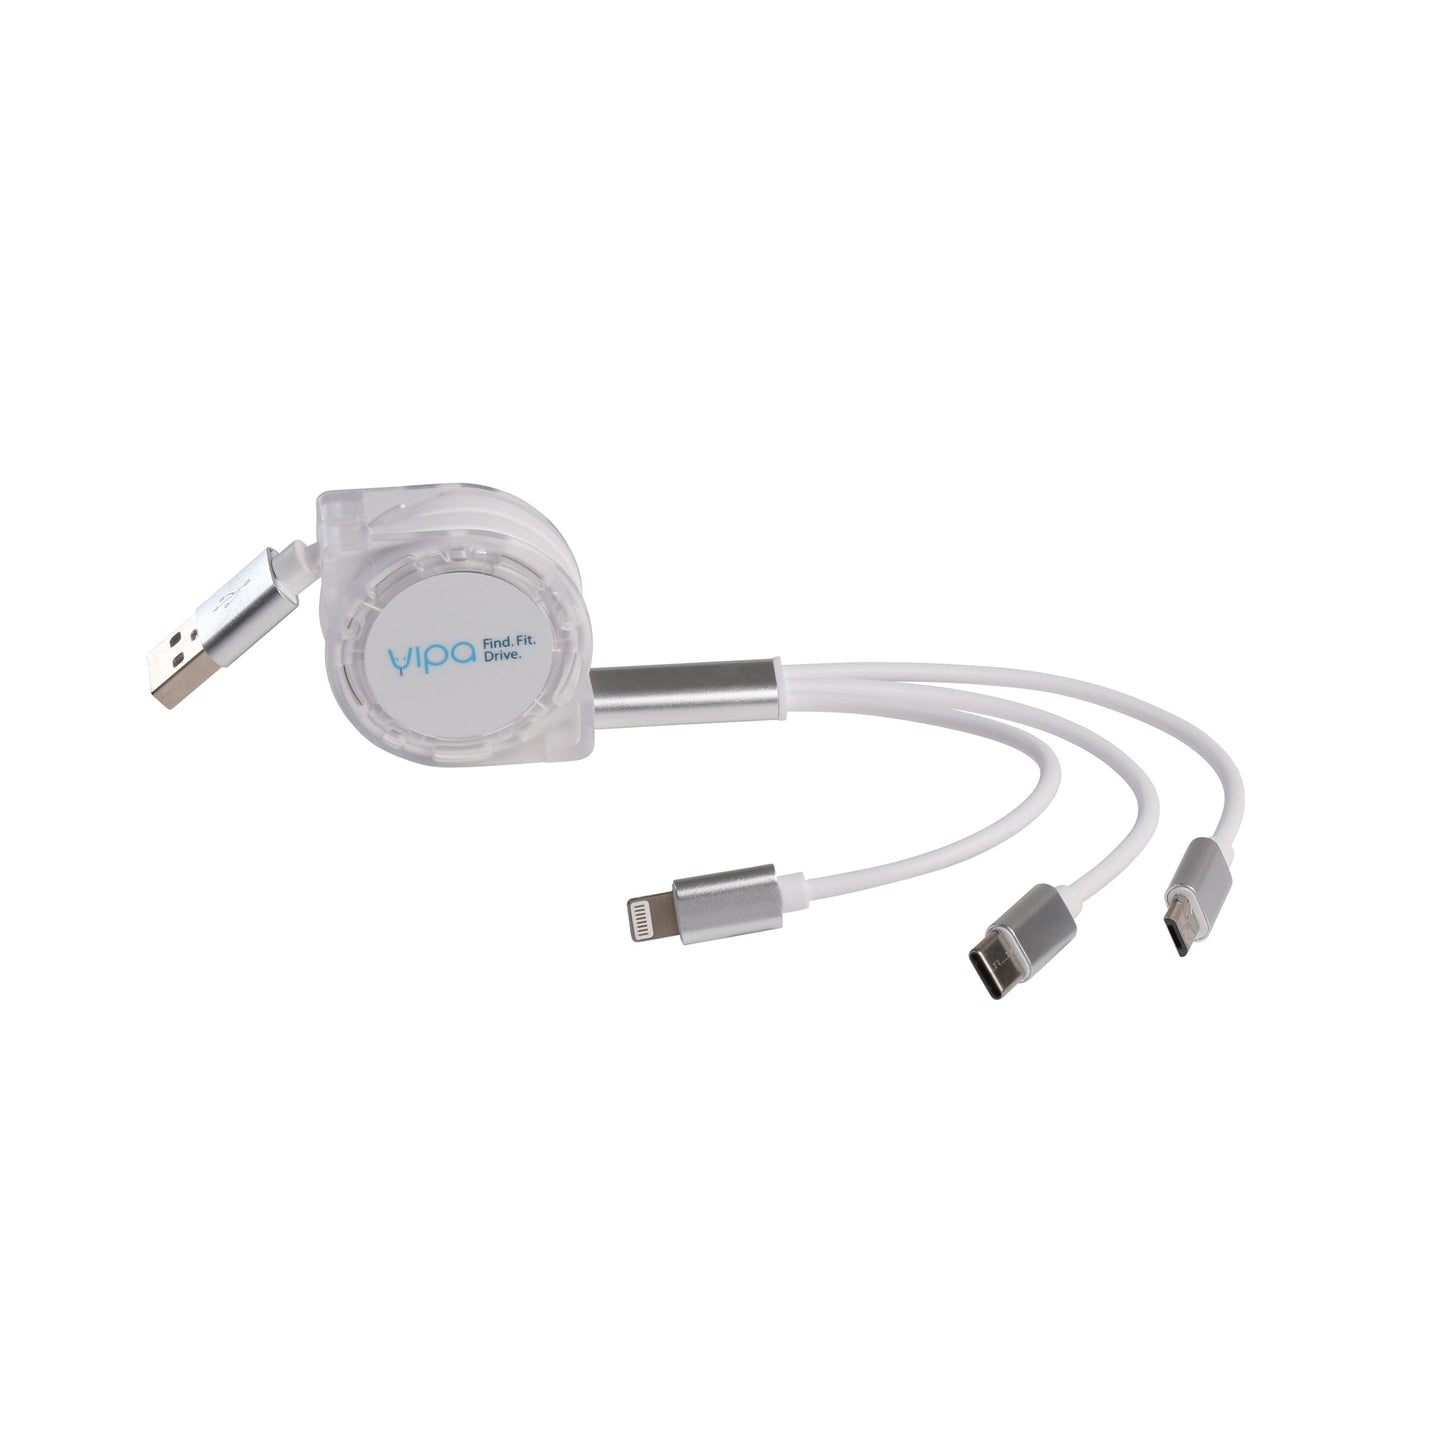 1M RETRACTABLE CHARGING CABLE - 3 IN 1